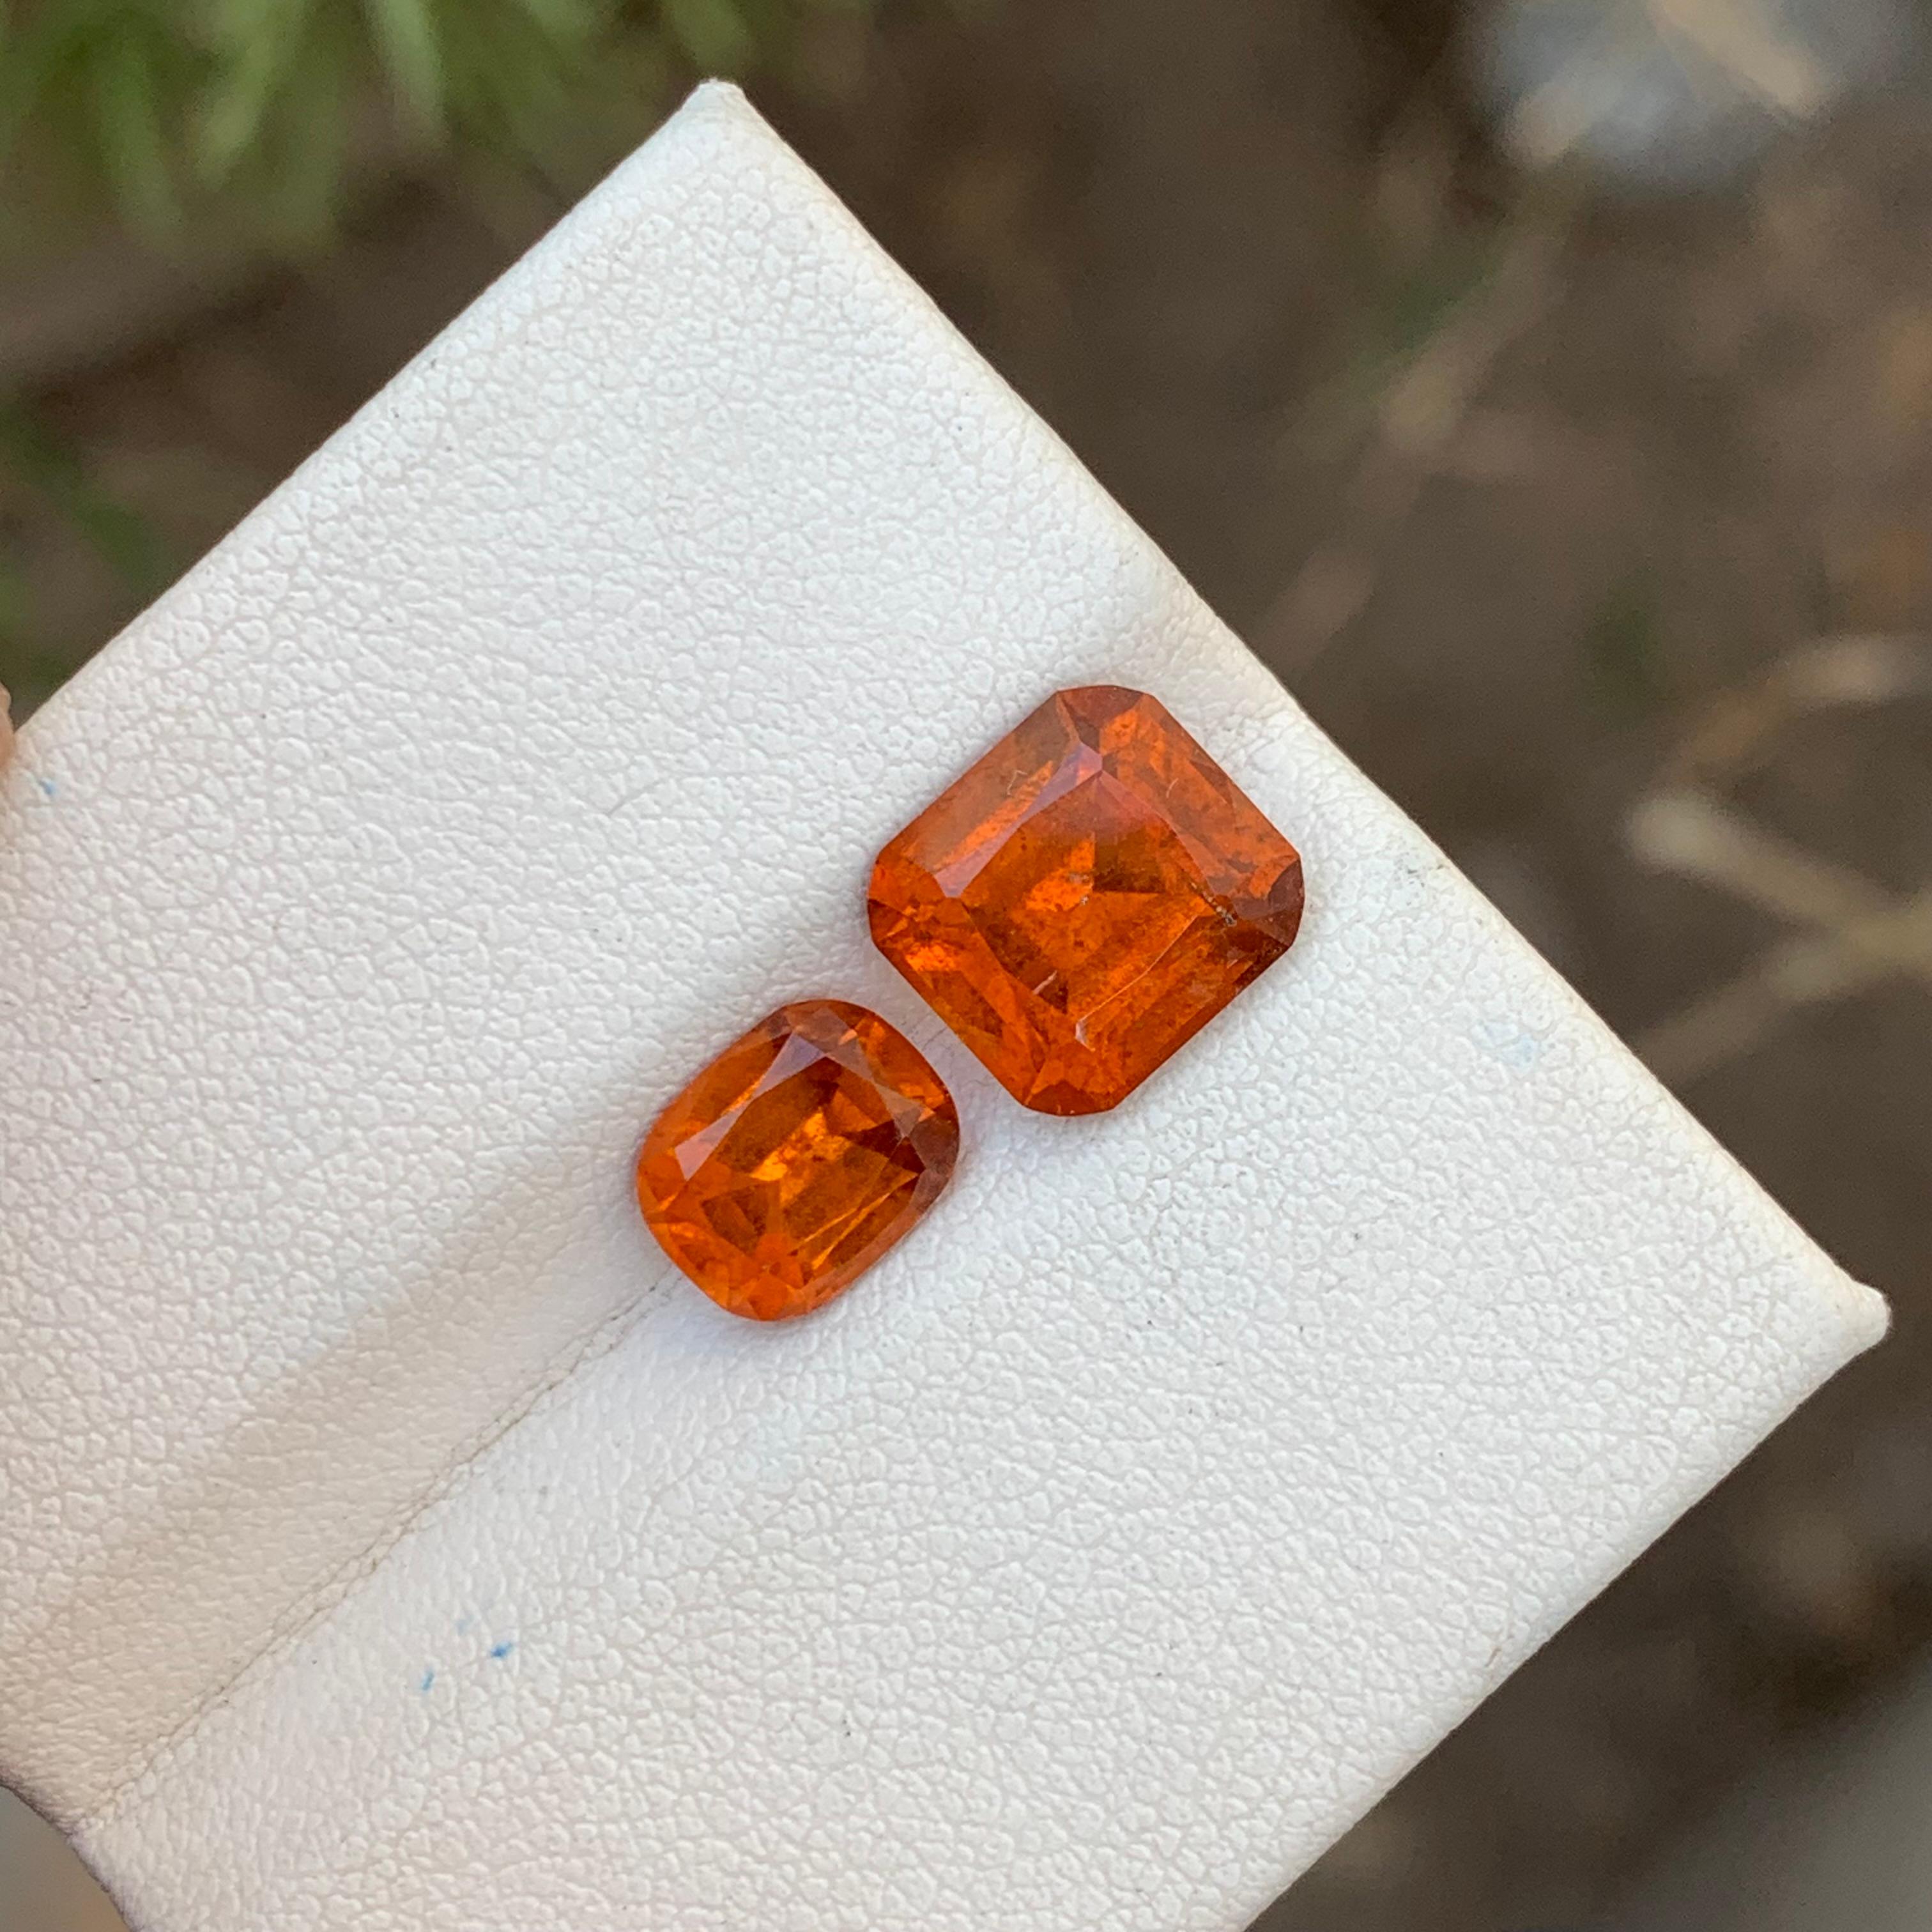 Taille coussin antique 5.95 Carats Natural Loose Hessonite Garnet 2 Pieces For Ring Jewelry Making  en vente